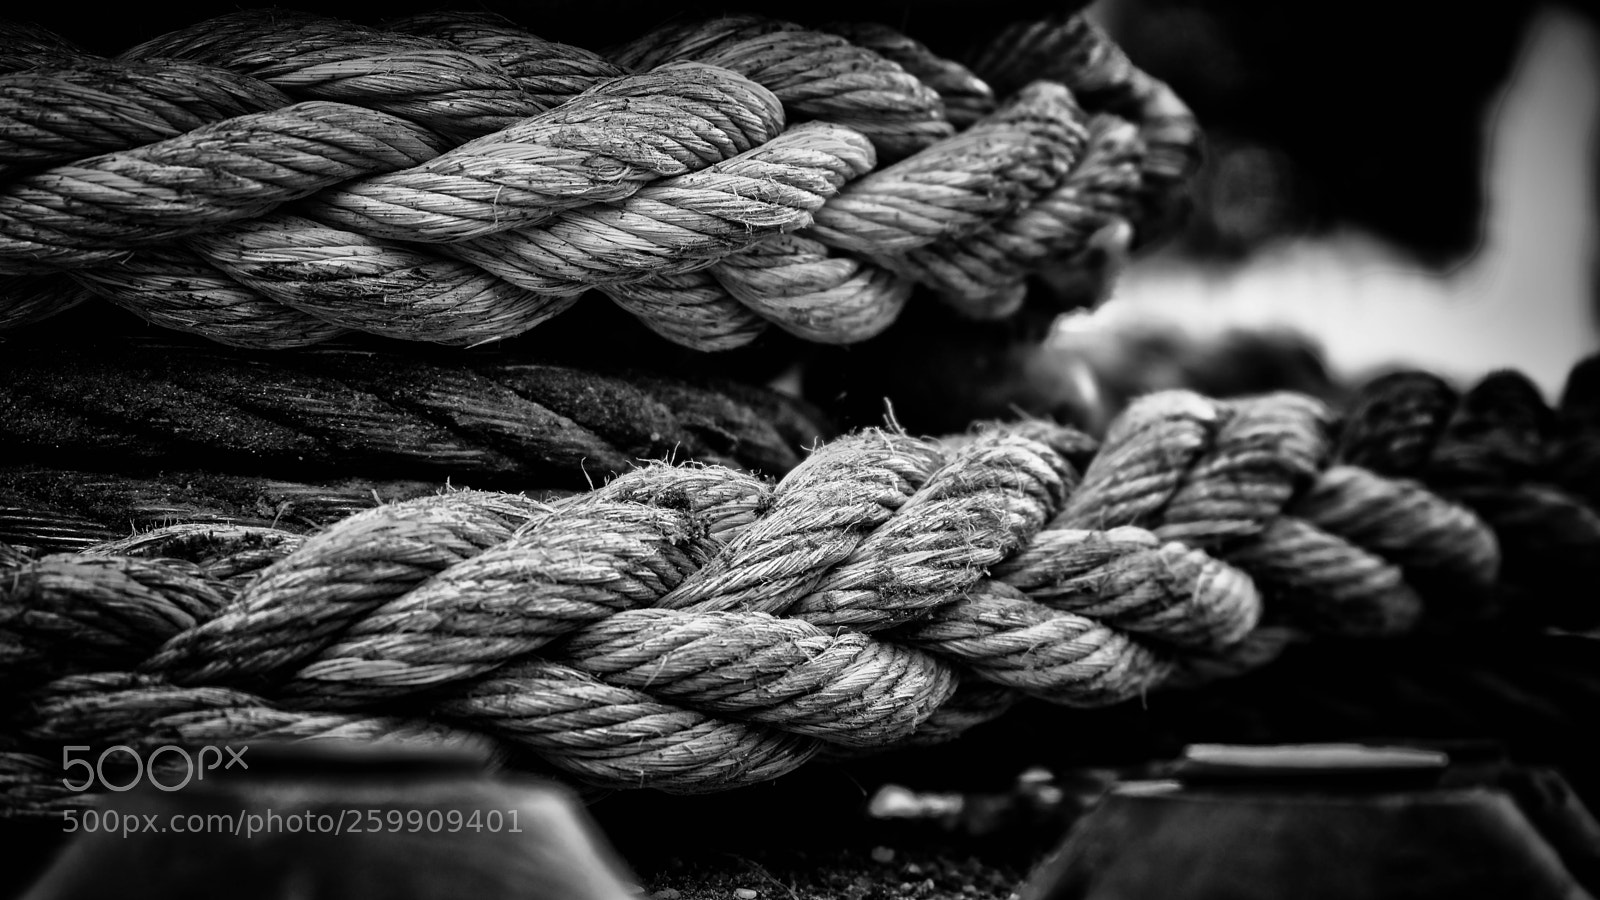 Sony a6300 sample photo. The rope photography